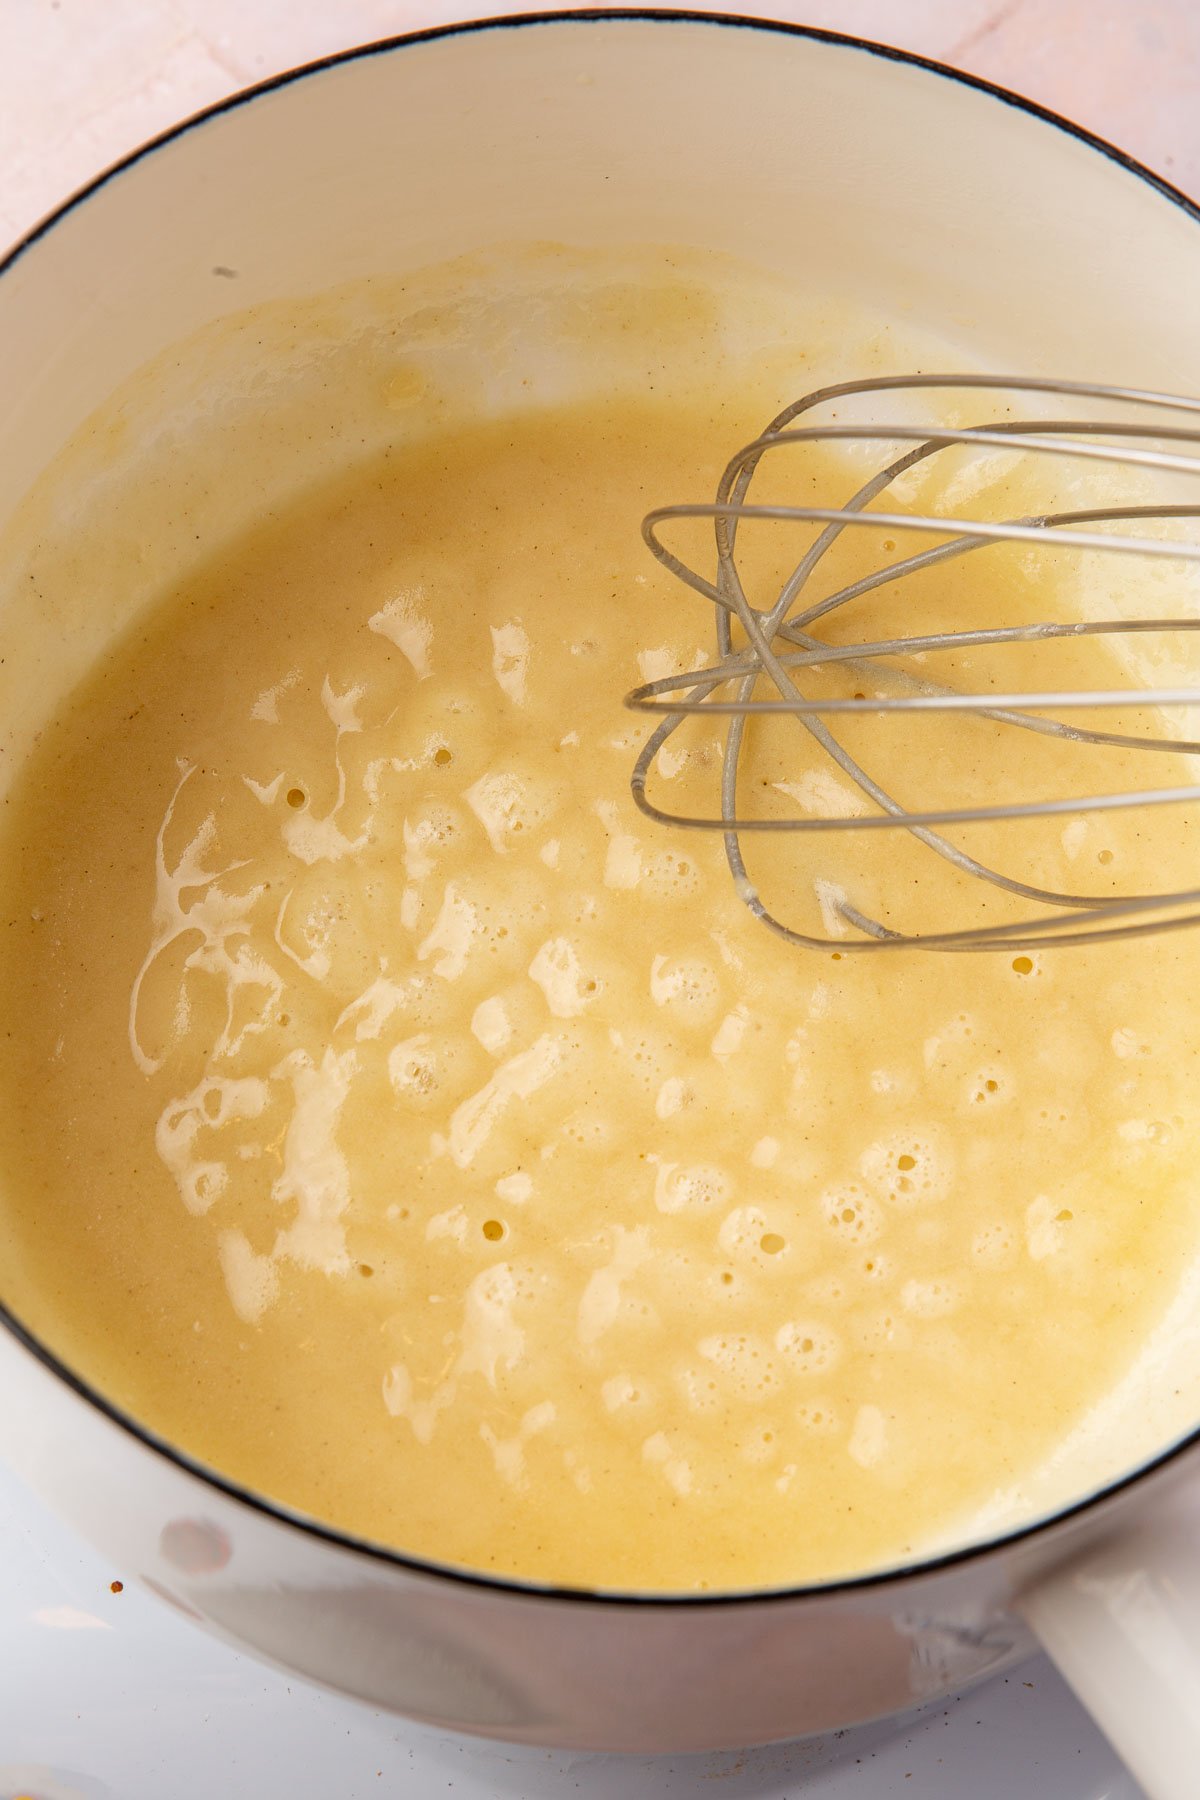 A blonde gluten-free roux being stirred by a wire whisk in a saucepan.